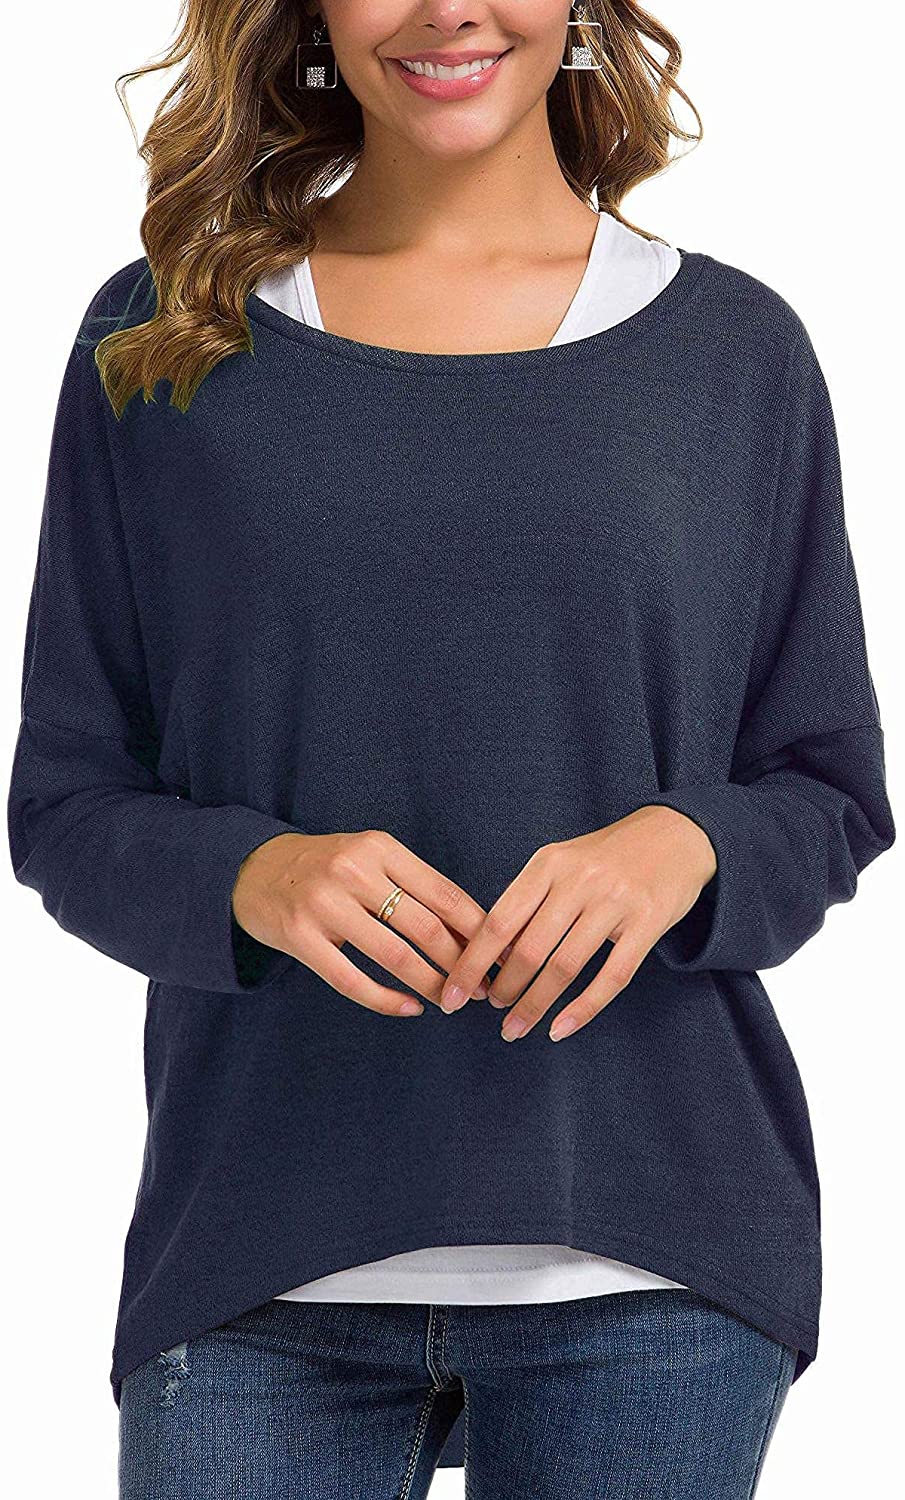 UGET Women's Oversized Baggy Tops Loose Fitting Pullover Casual Blouse T- Shirt S | eBay